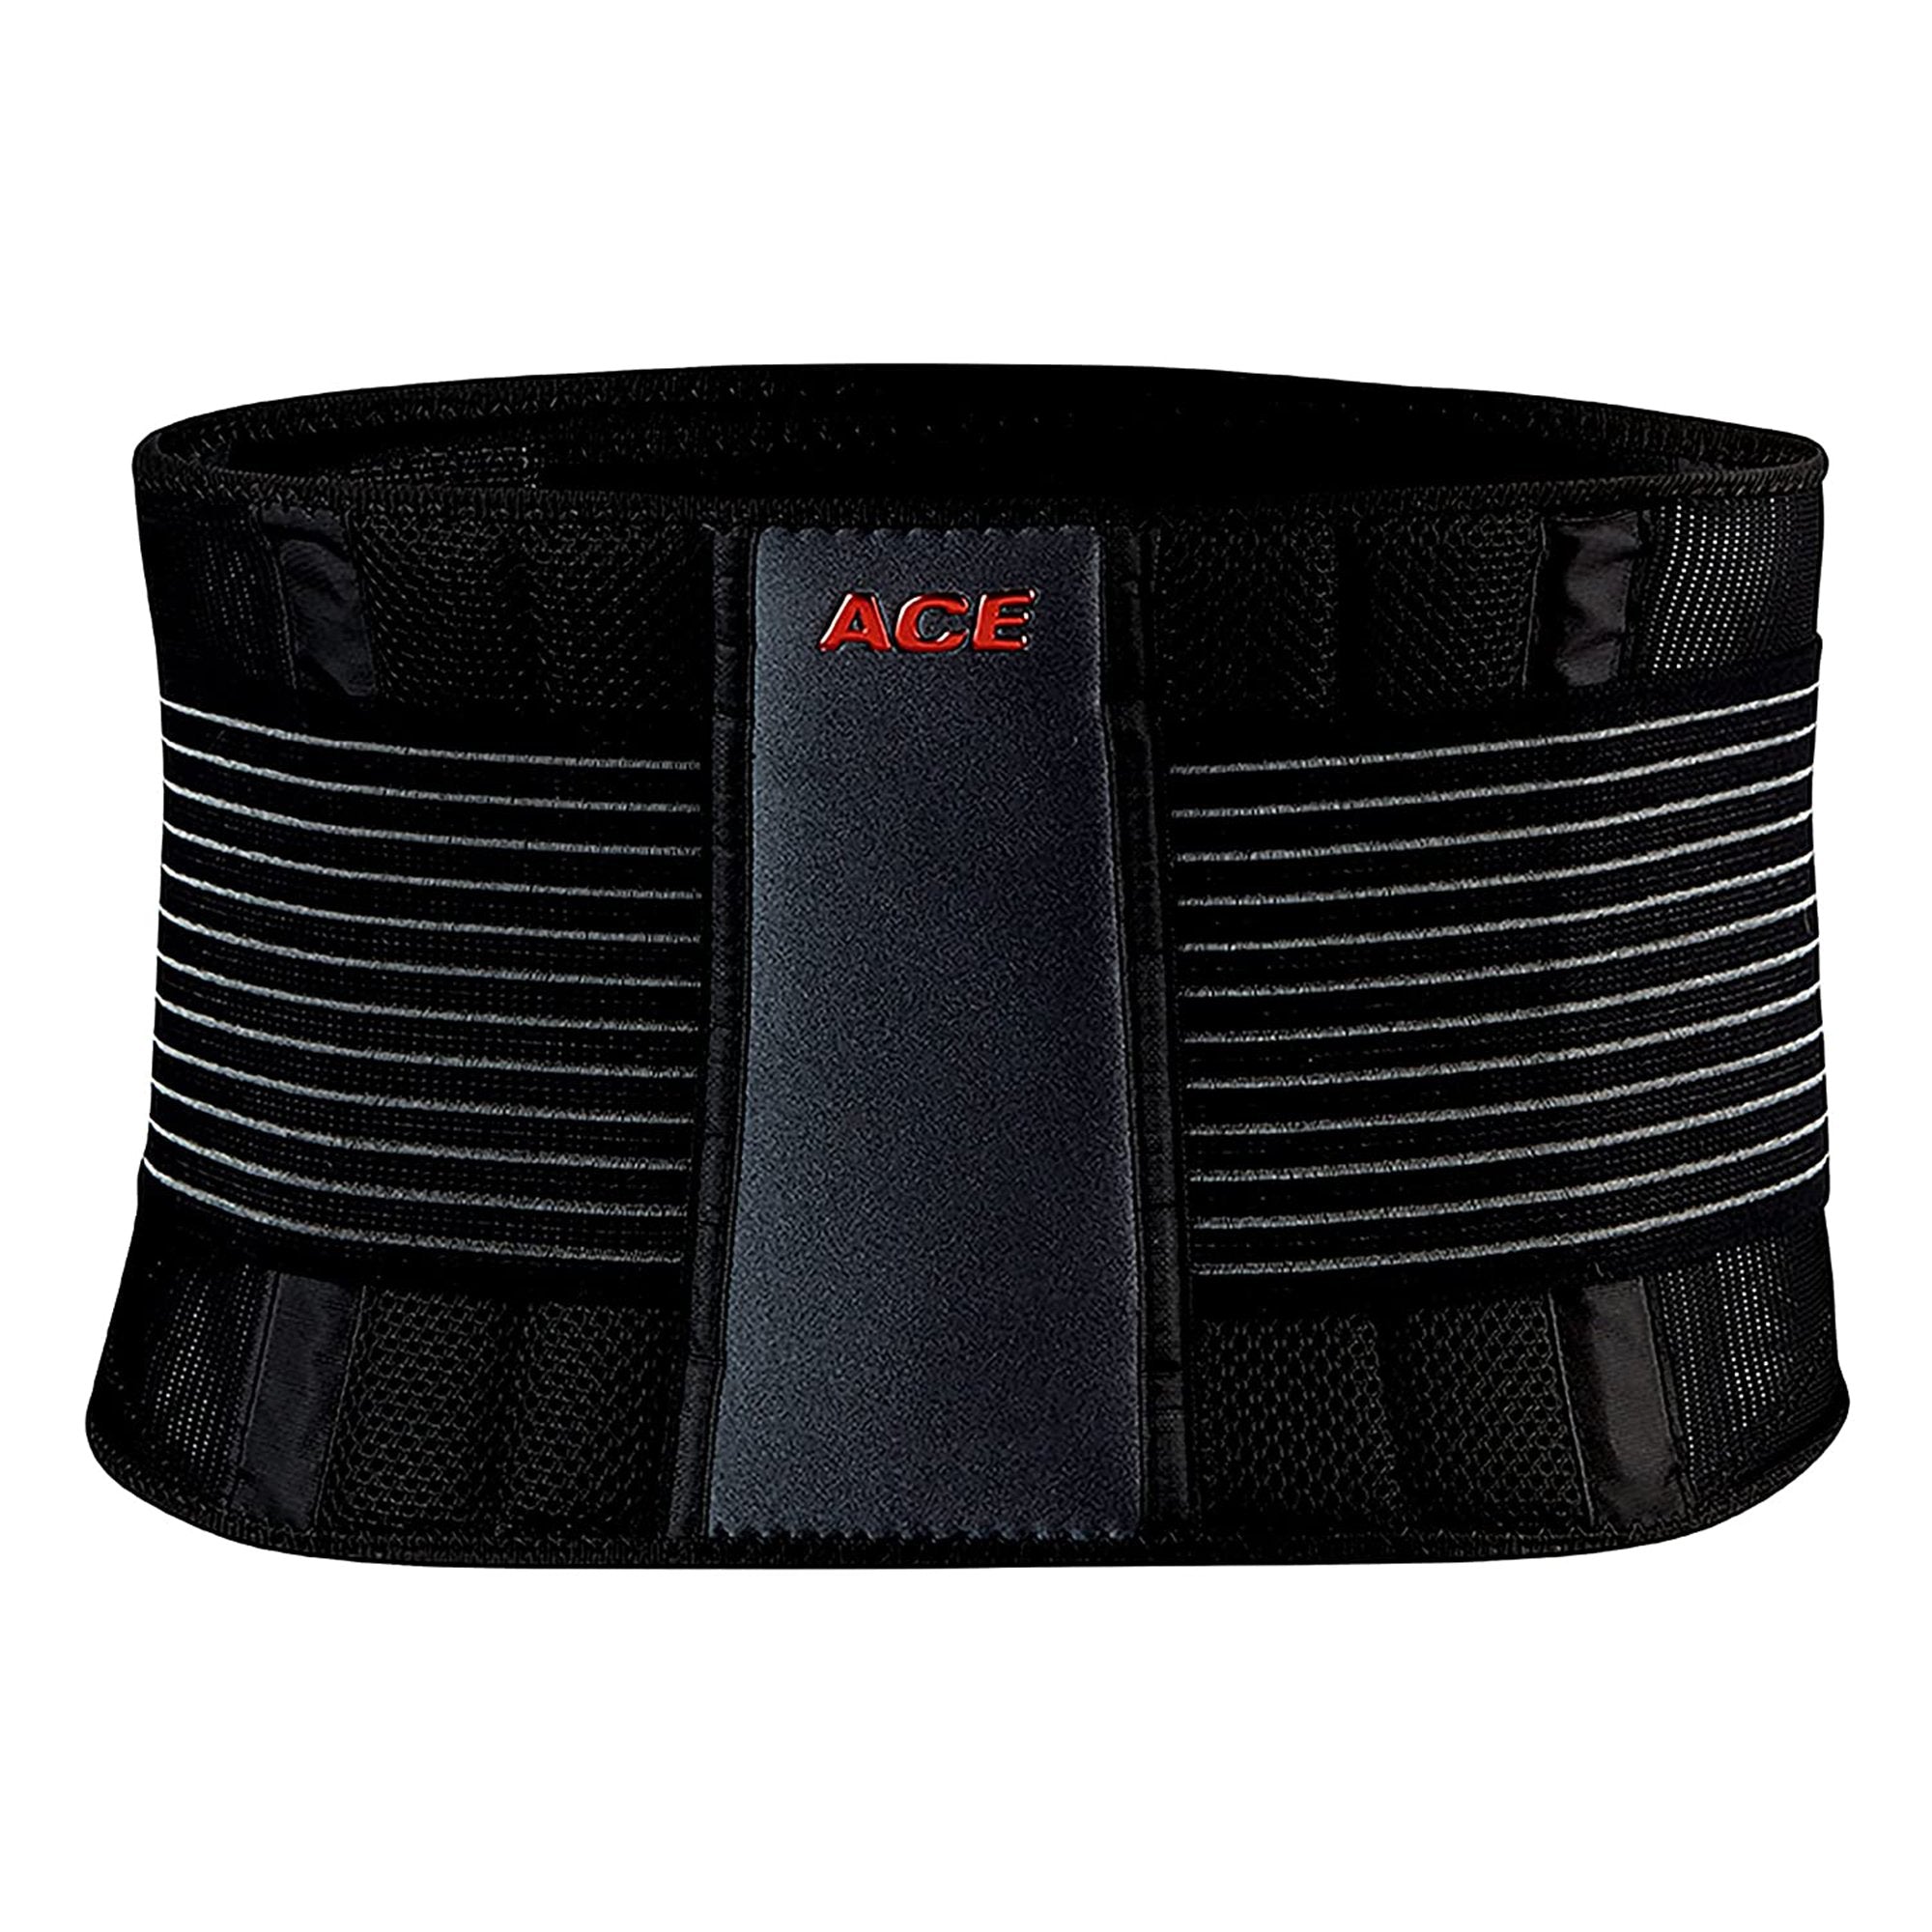 Ace™ Back Support Brace Hook & Loop Closure with Breathable Back Panel